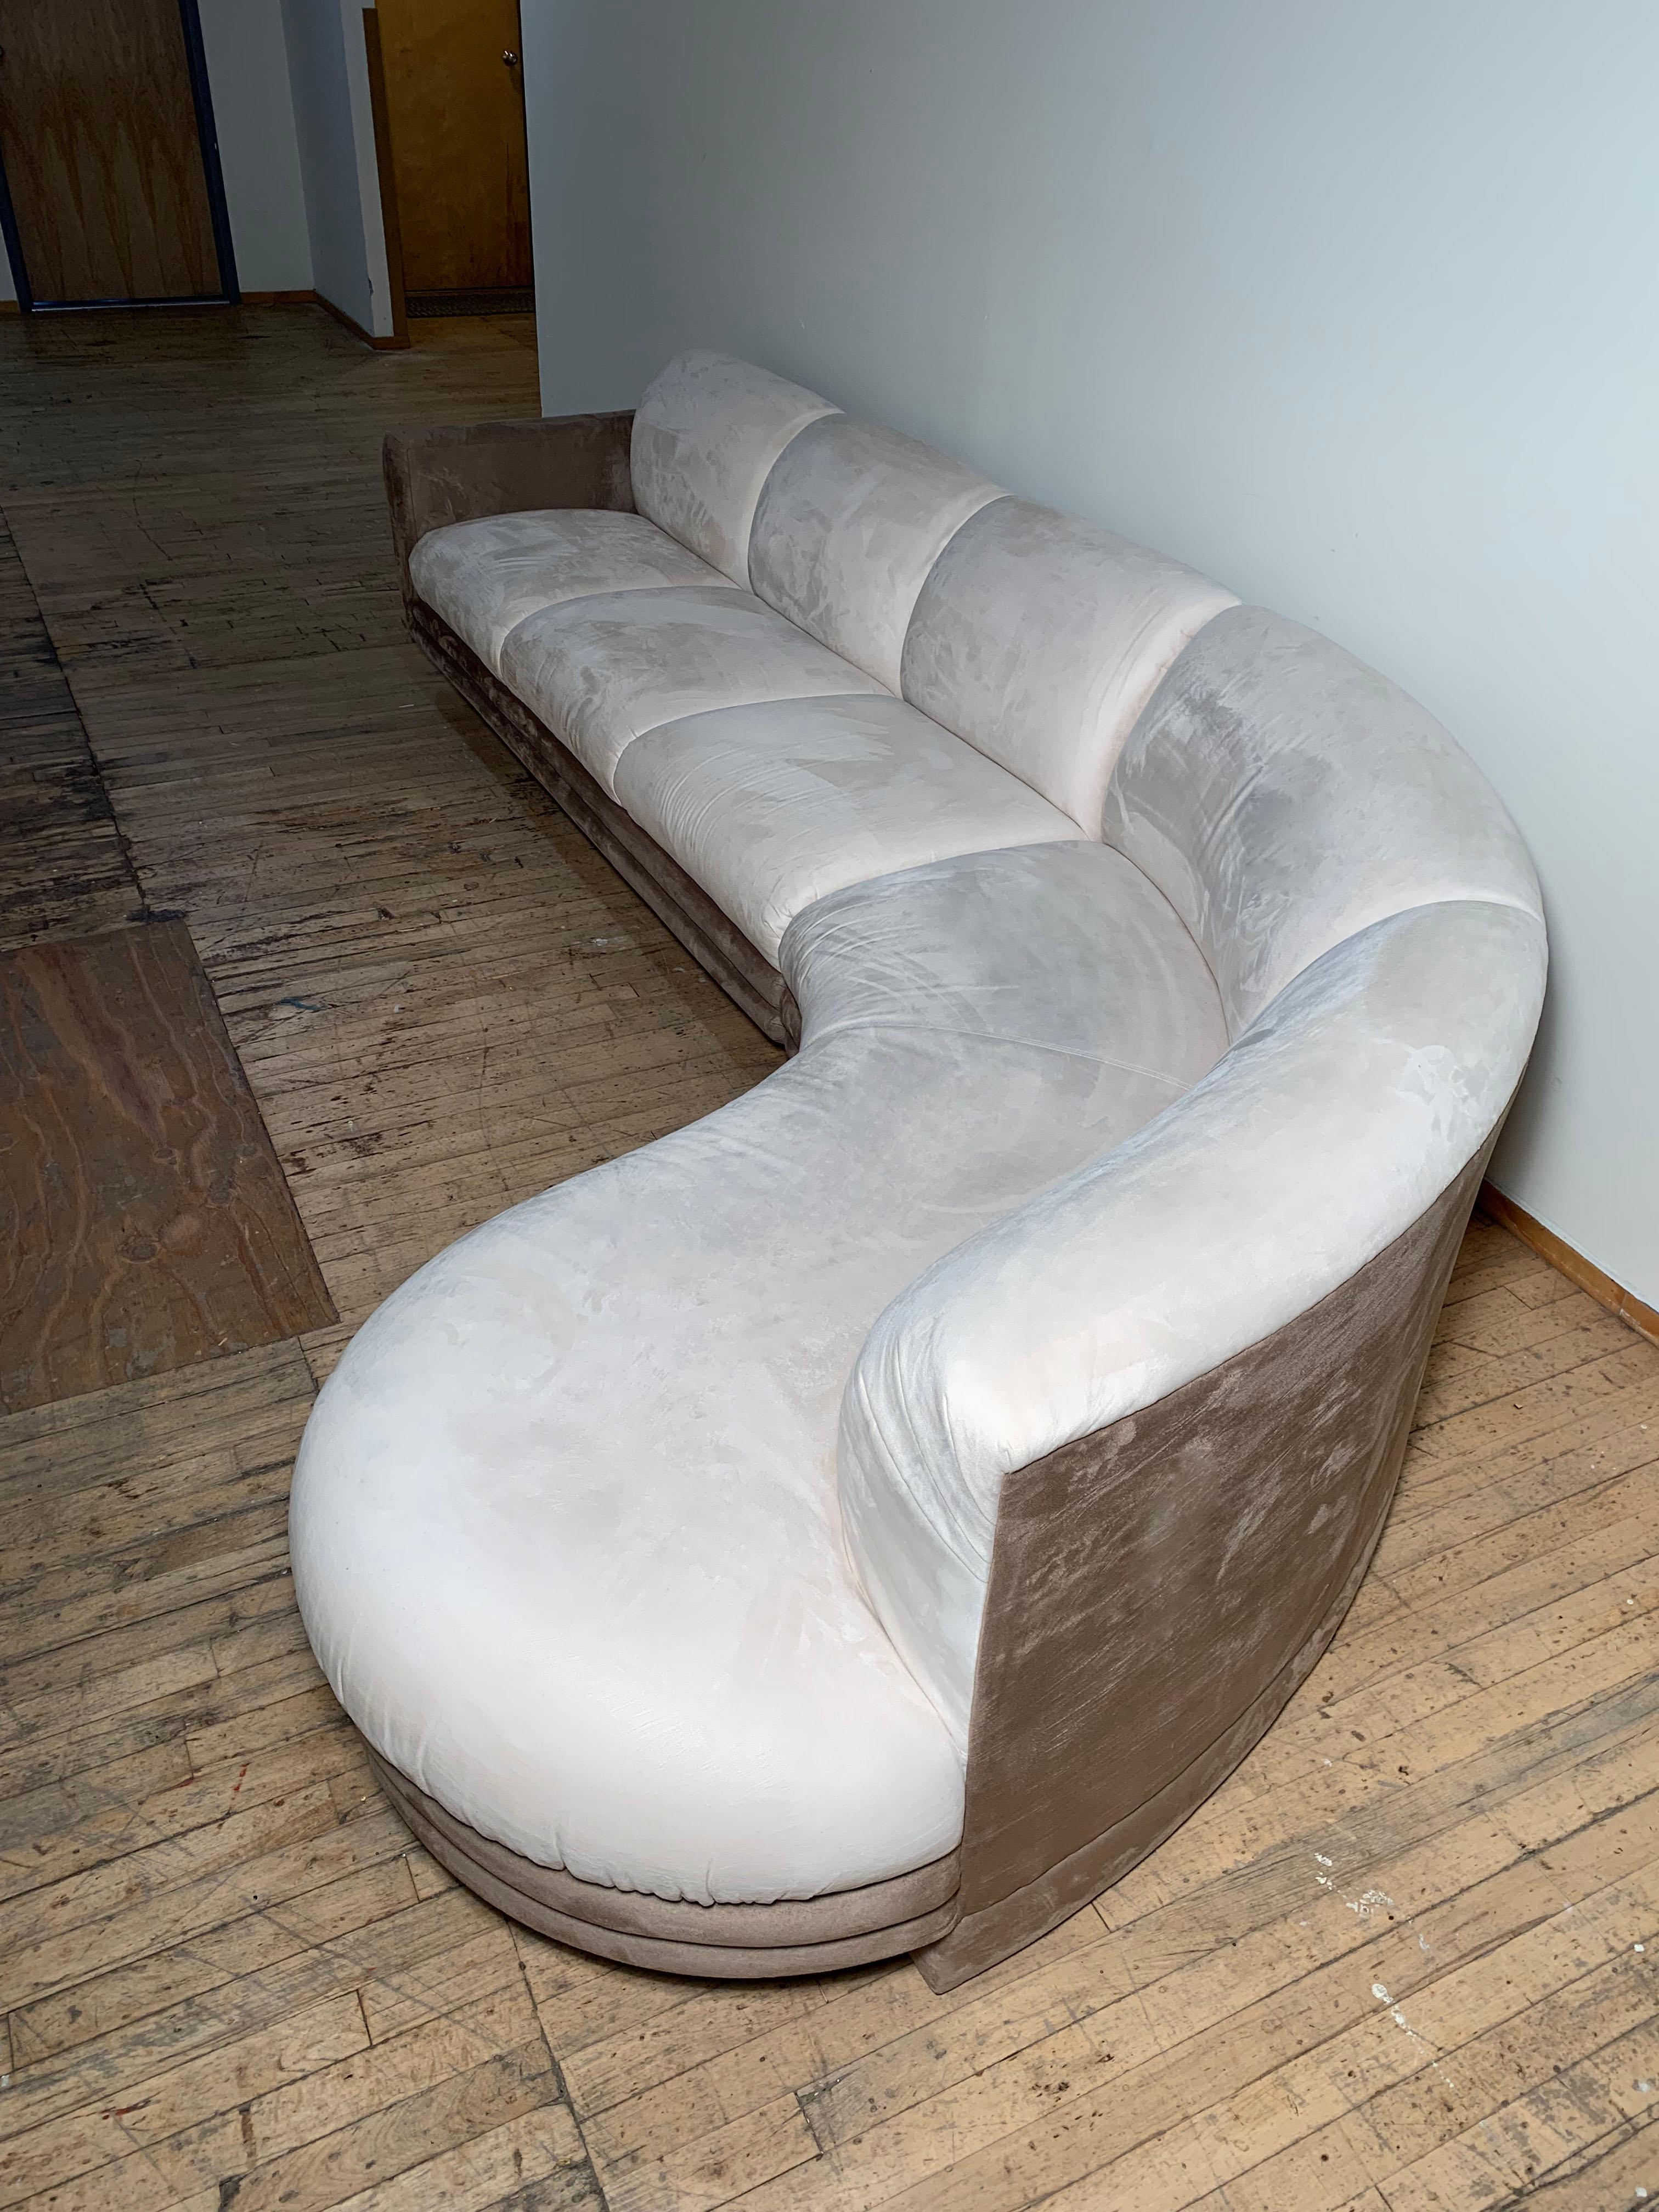 Clean Modern serpentine cloud sectional sofa manufactured by Weiman Preview Line Attributed to Vladimir Kagan.

Weiman Preview Label included. This identical design was also produced by Directional. I have references I can provide showing the